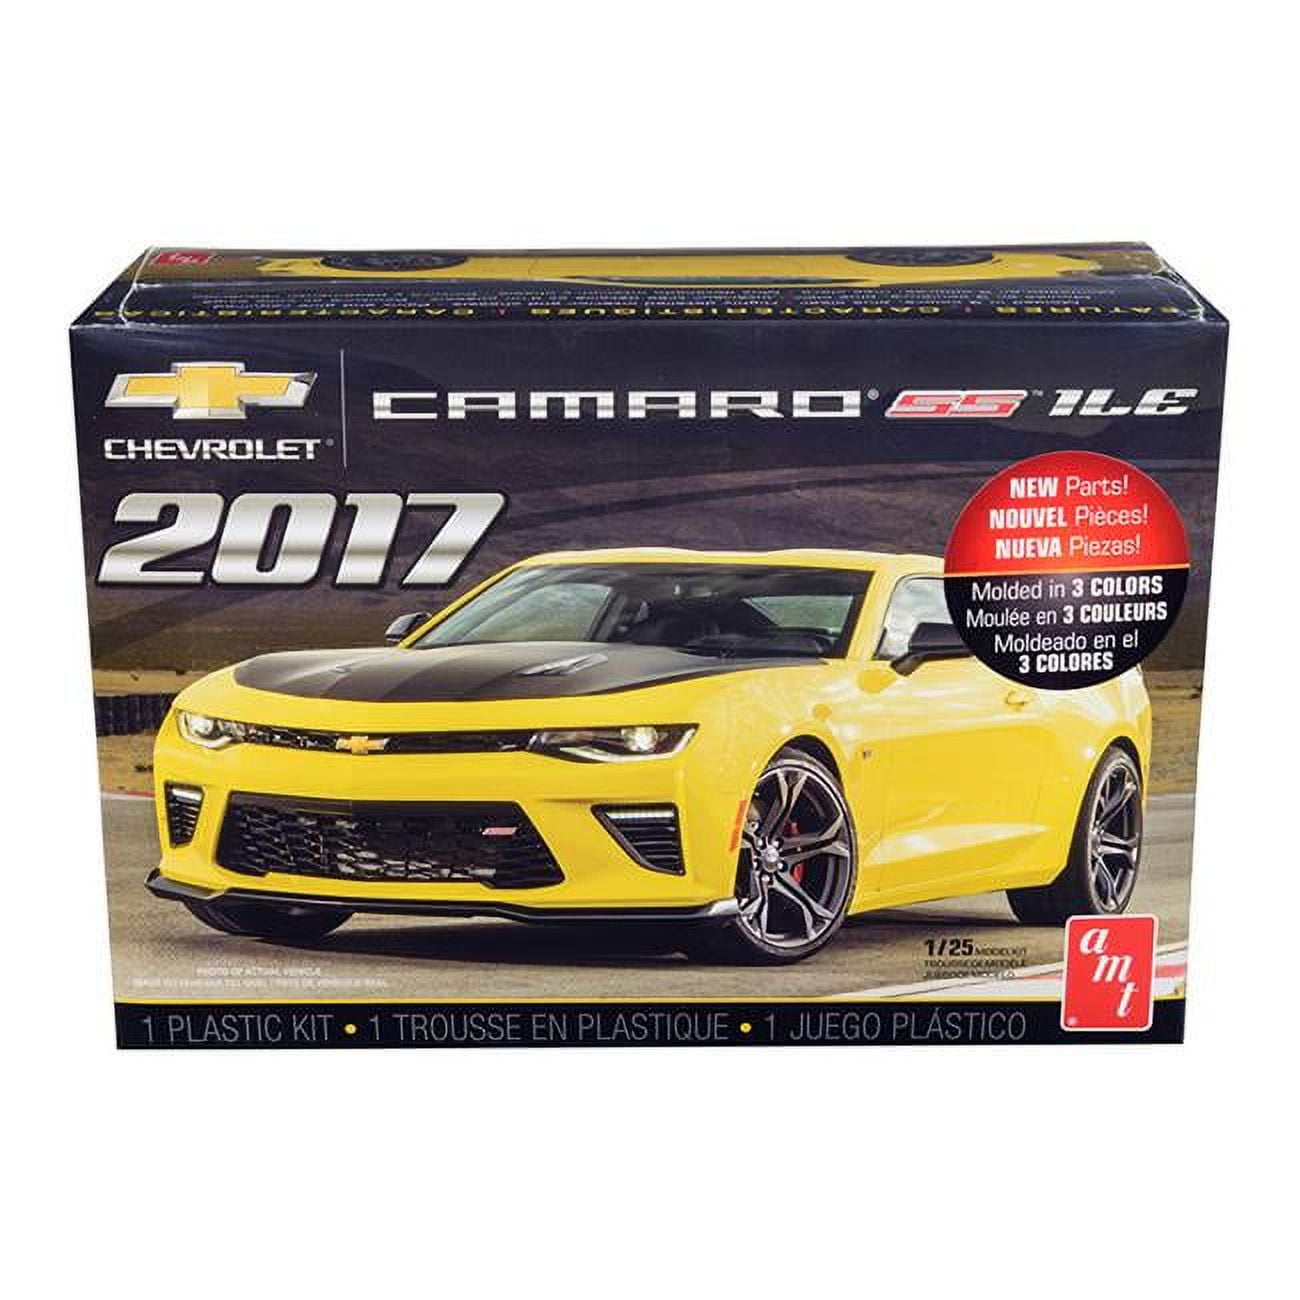 1074m Chevrolet Camaro Stainless Steel 1le 1 By 25 Scale & Skill 2 Model Kit For 2017